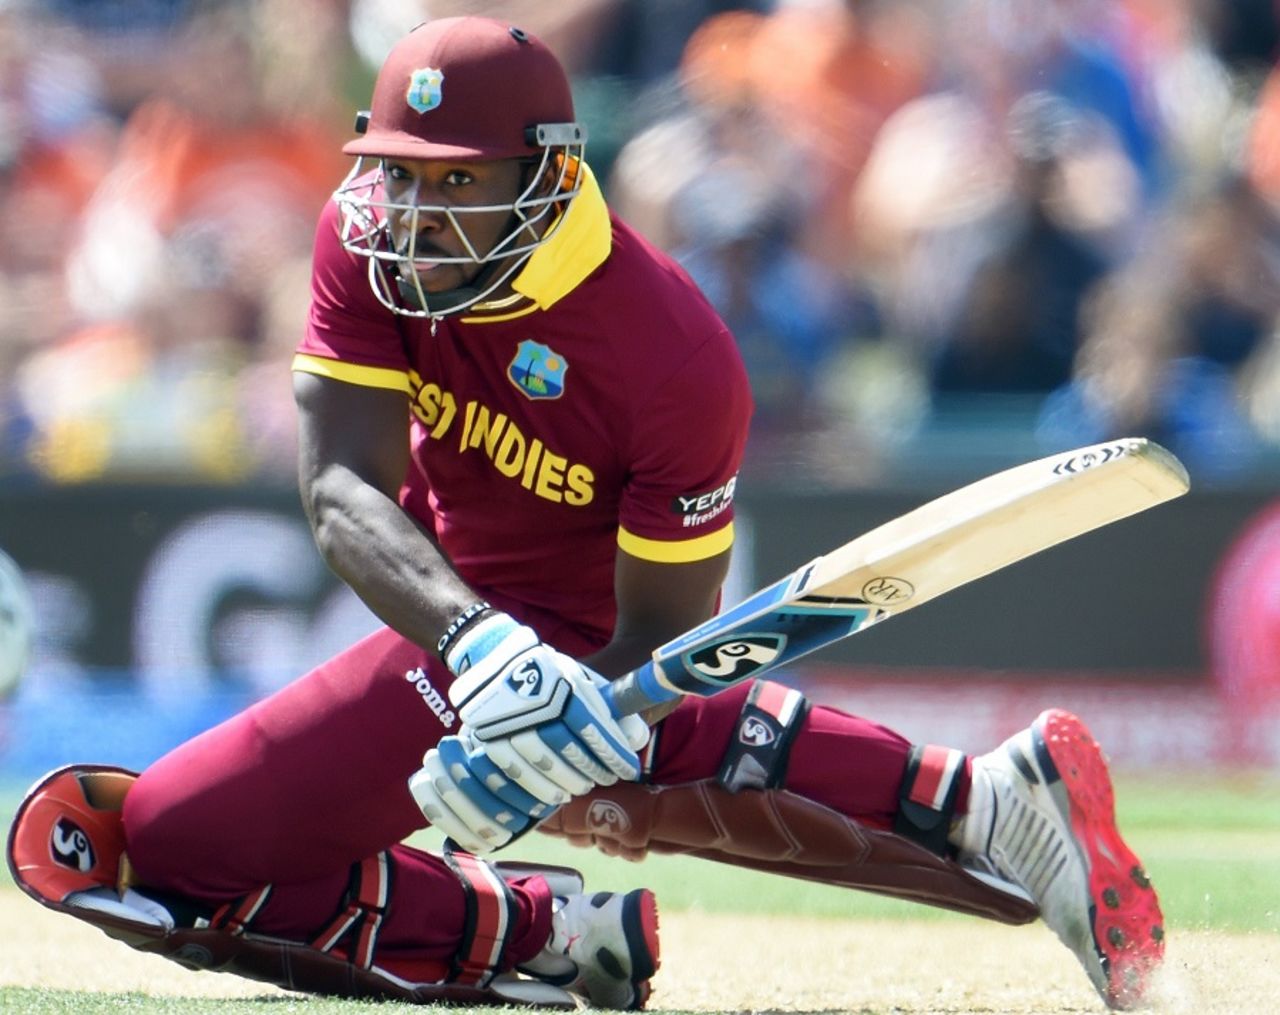 Andre Russell plays an outrageous shot during his 13-ball 42, Pakistan v West Indies, World Cup 2015, Group B, Christchurch, February 21, 2015